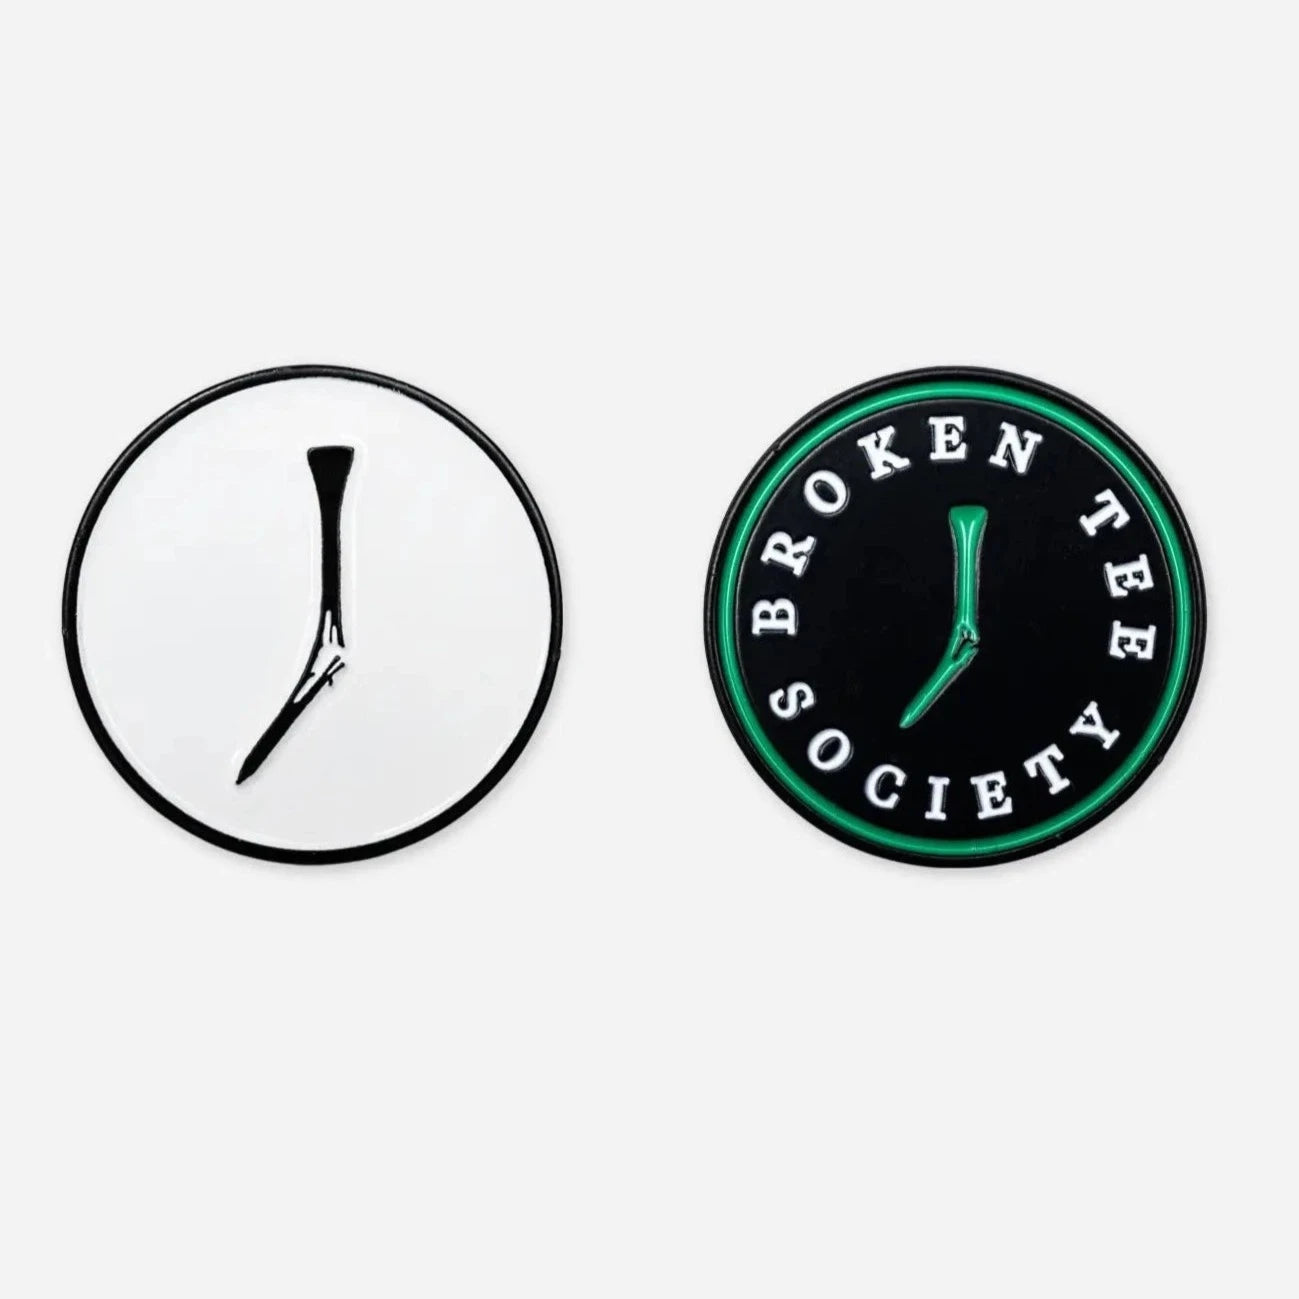 2 ball Markers: 1 black & white with a broken tee, 1 black with a green broken tee and 'broken tee society' written on it in white letters